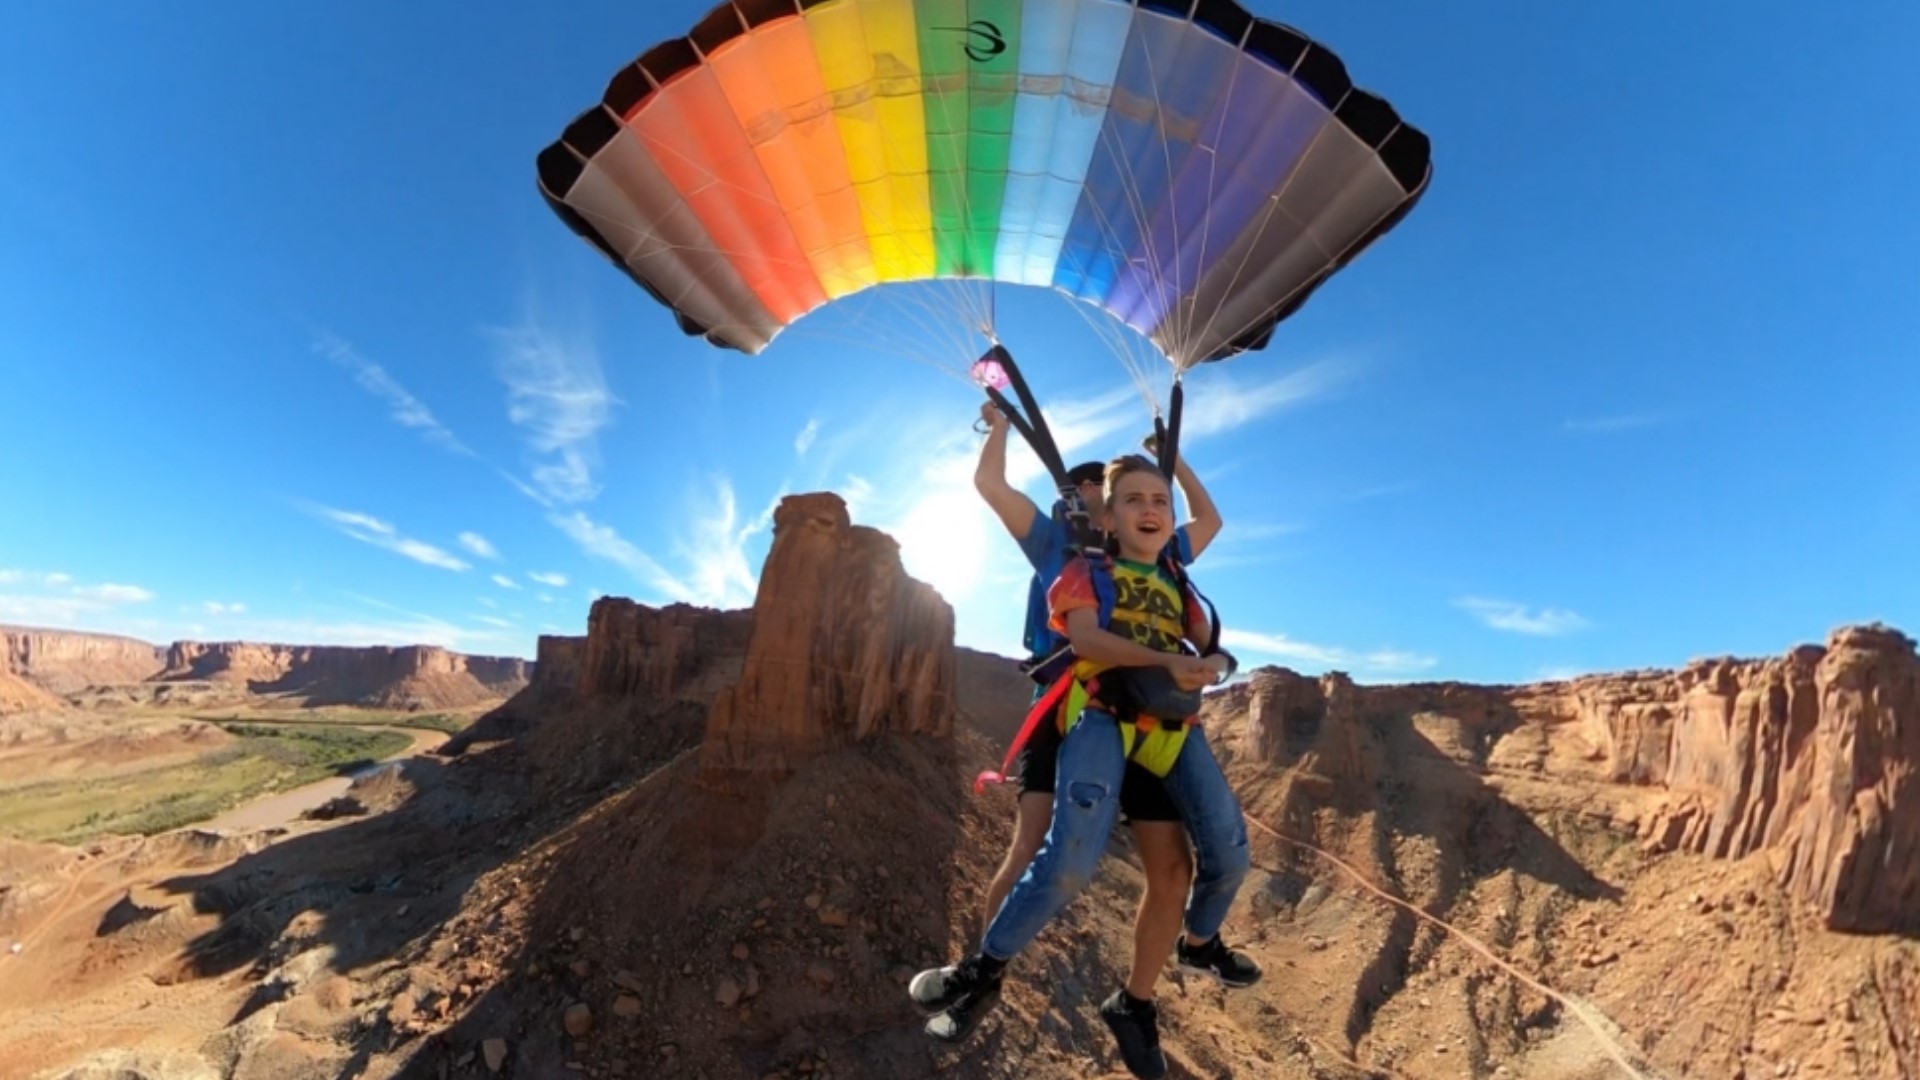 Following a birthday celebration that made him one of the country's youngest skydivers, a thrill-seeking El Dorado County kid is at it again.